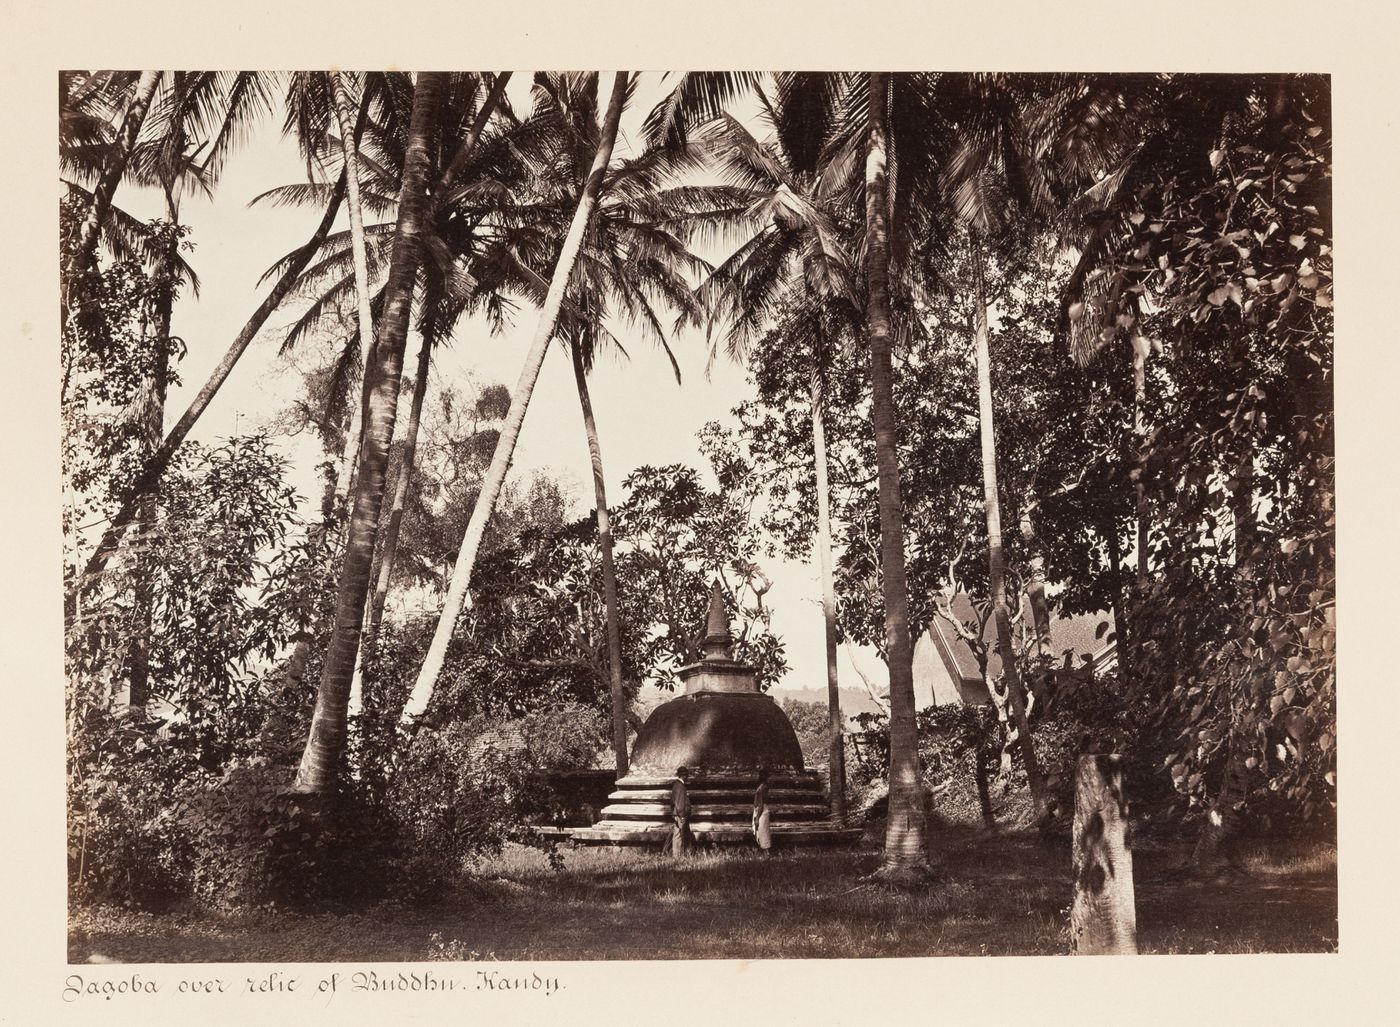 View of a dagoba with St. Paul's Church on the right, Kandy, Ceylon (now Sri Lanka)